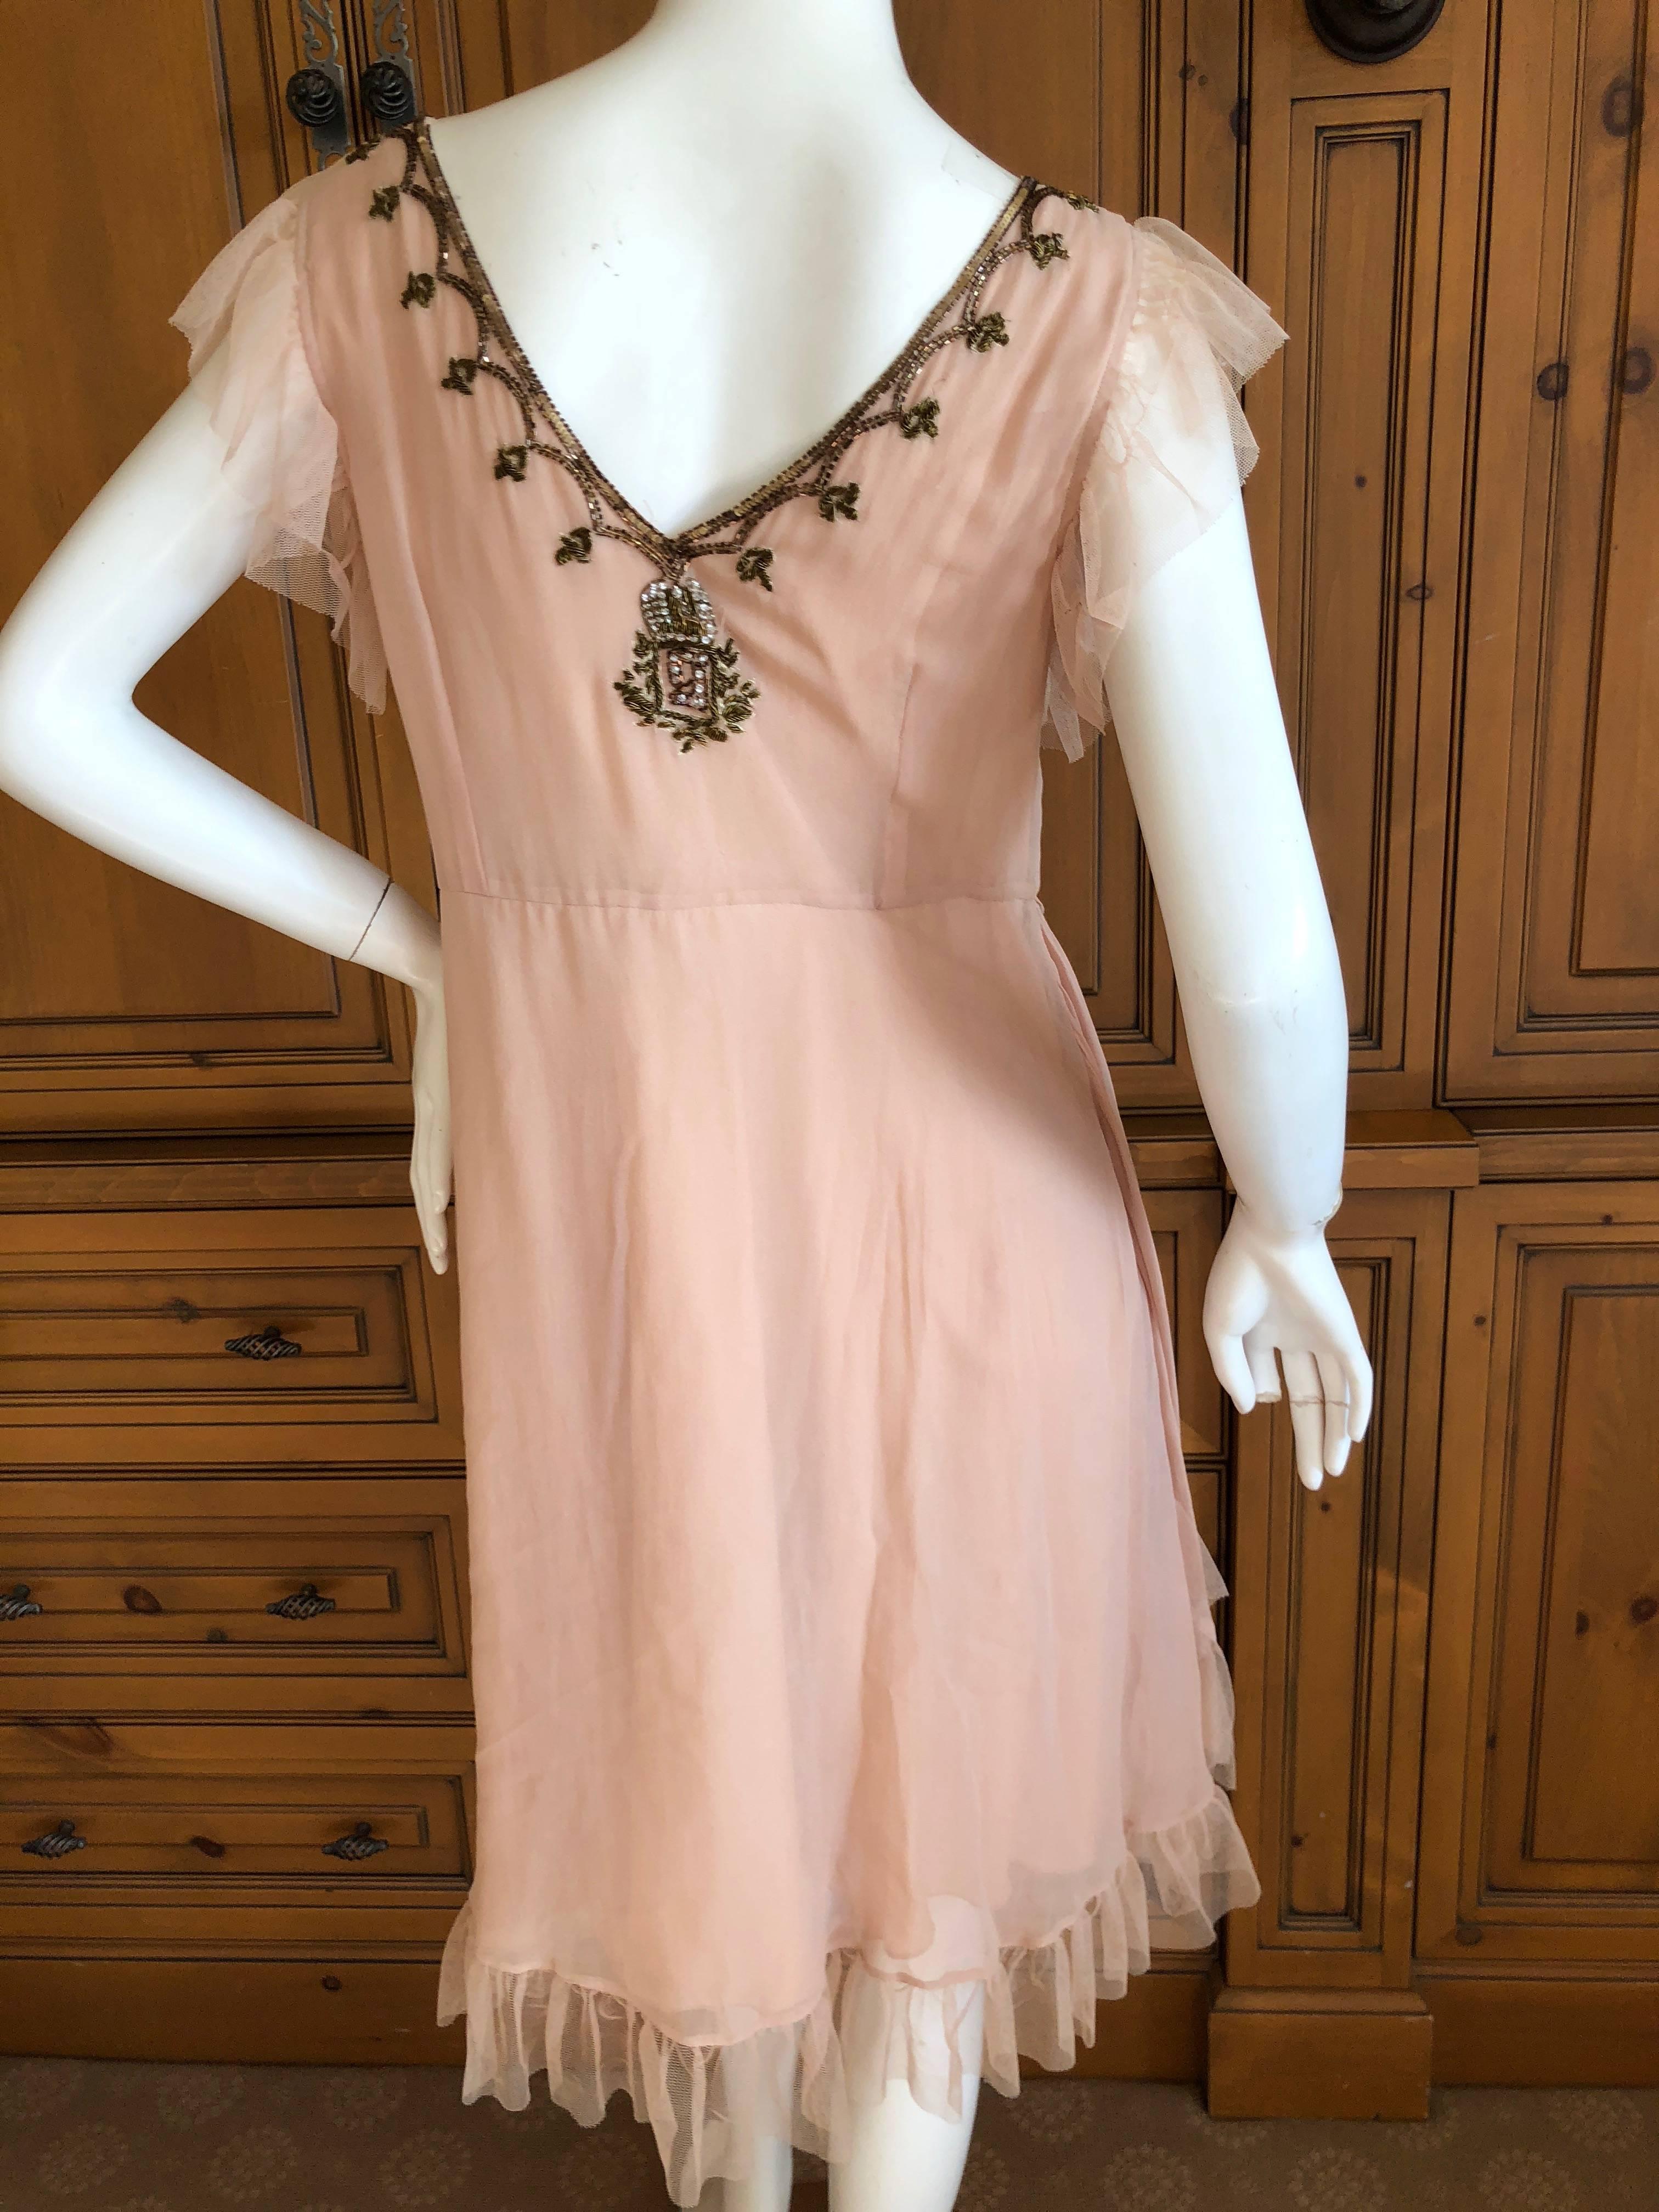 John Galliano Vintage Embellished Draped Cocktail Dress New With Tags 2